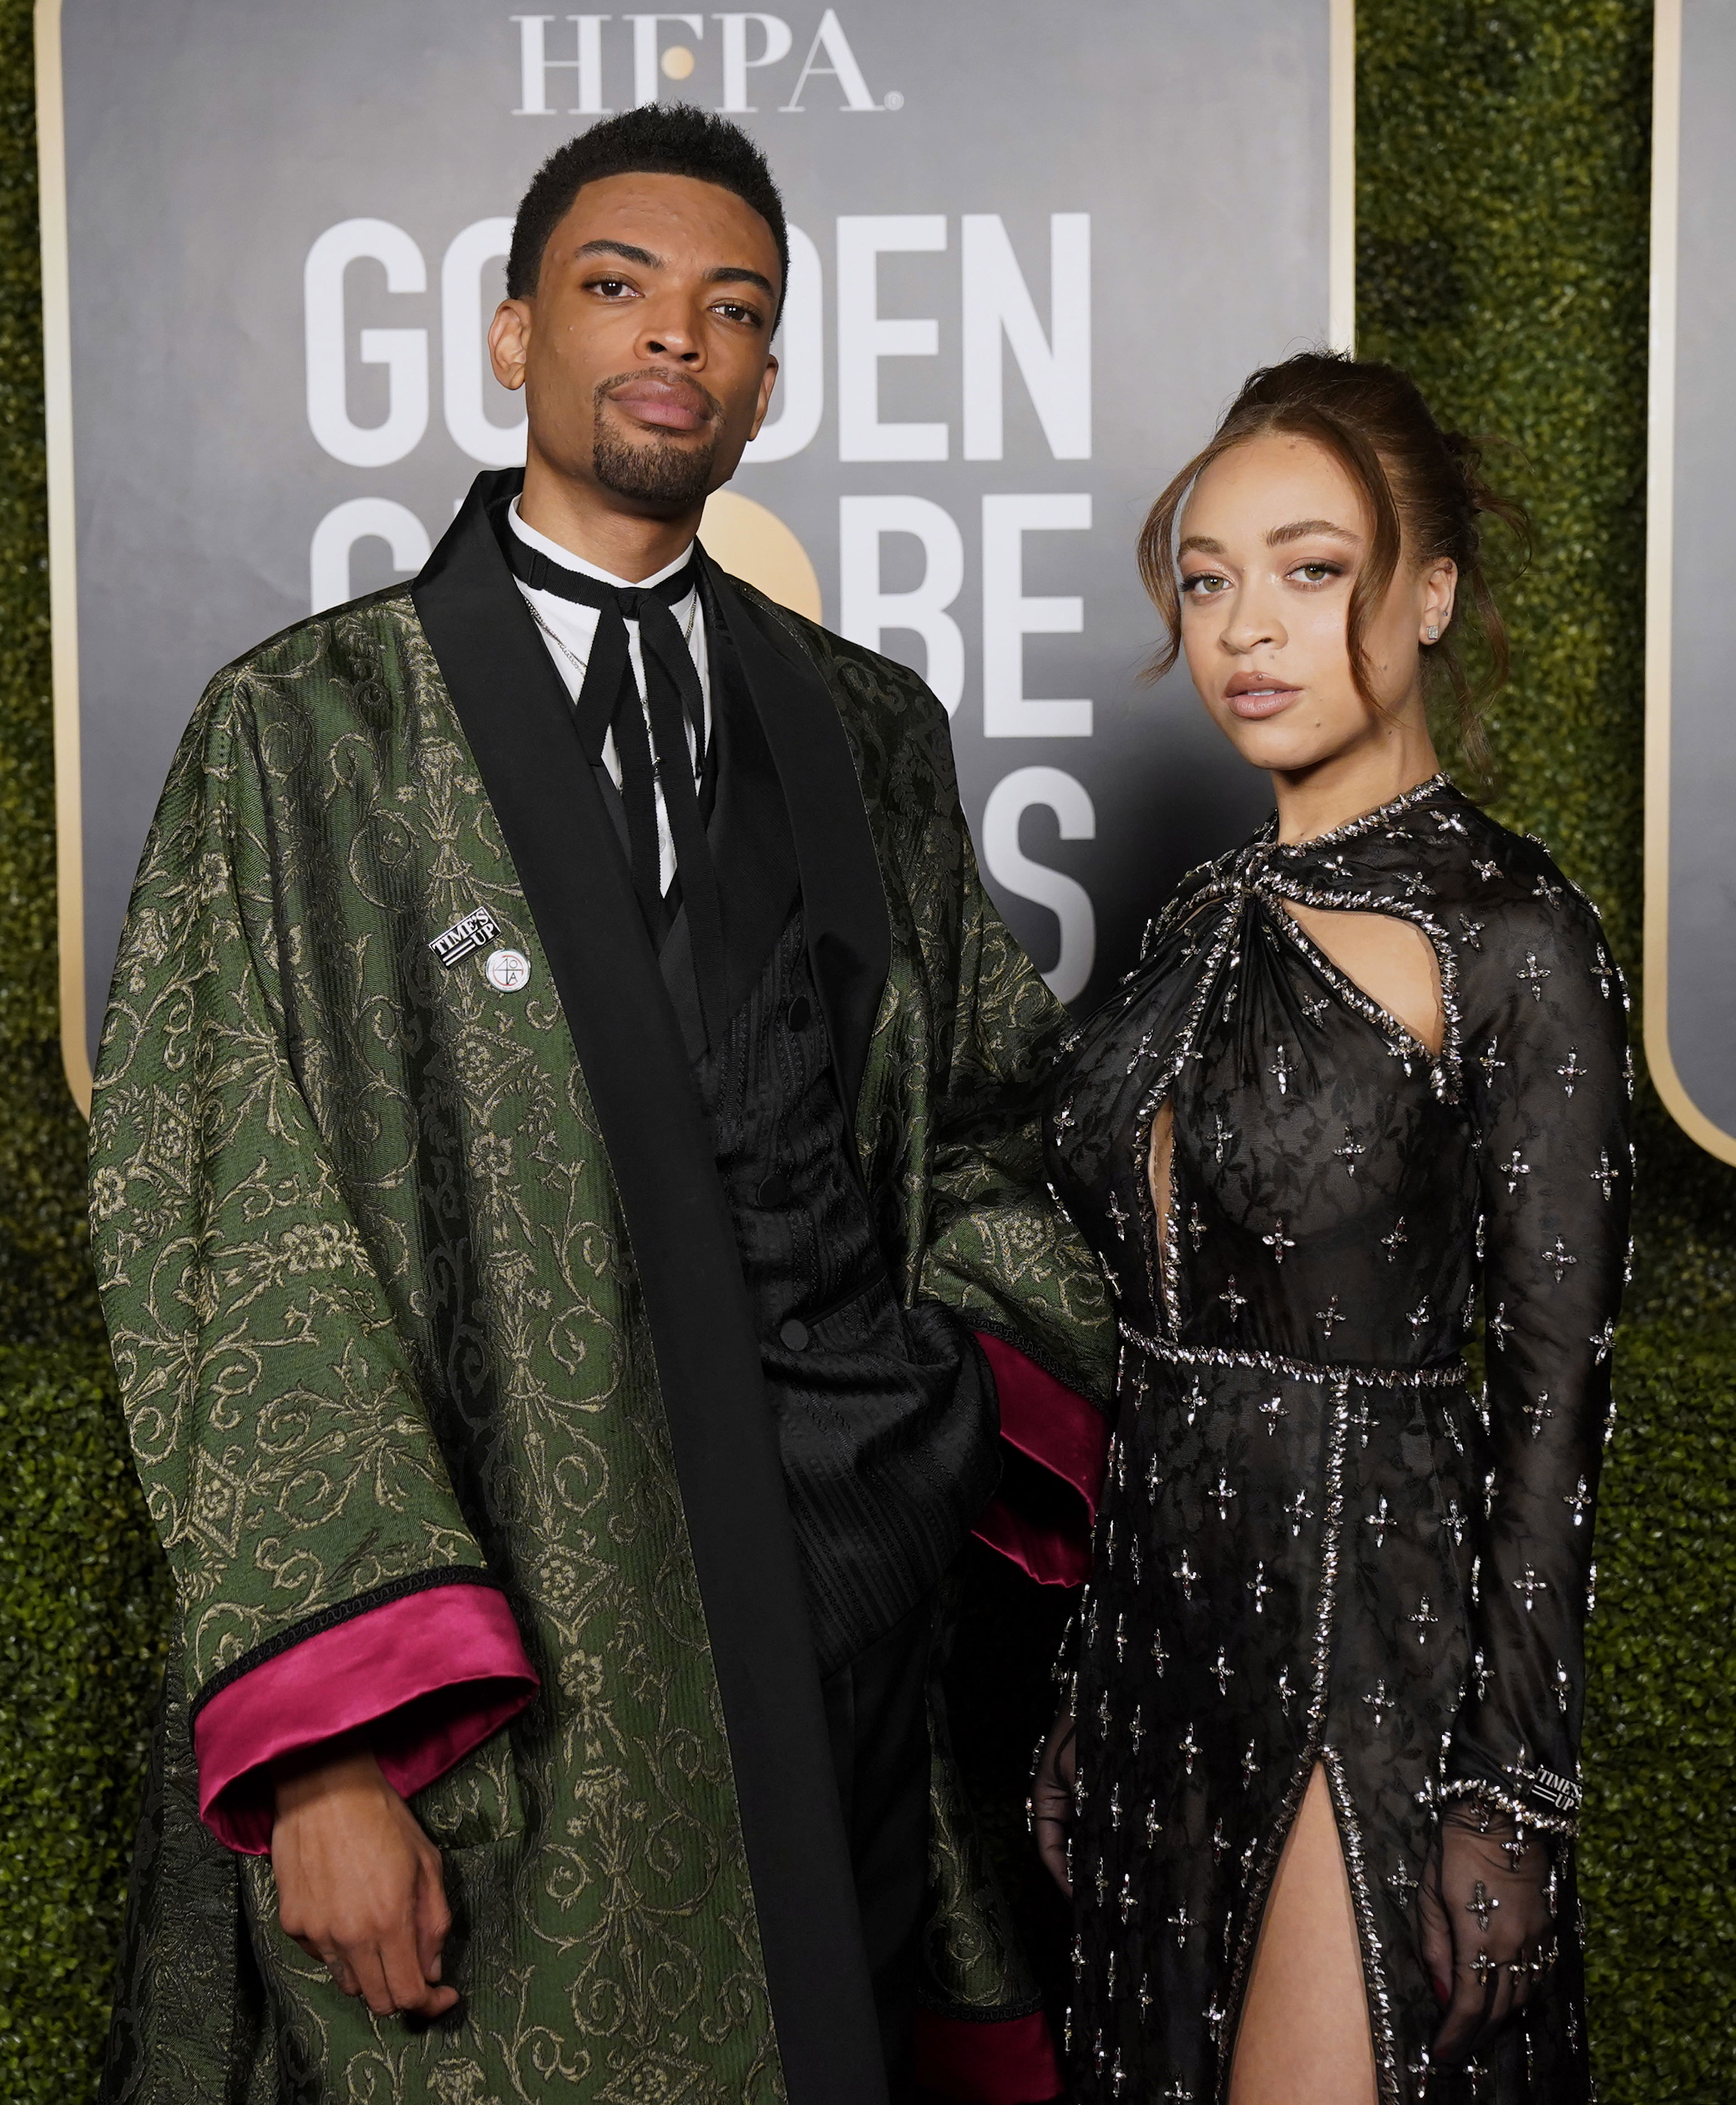 <p>In January 2021, the Hollywood Foreign Press Association named Jackson Lee and Satchel Lee -- filmmaker Spike Lee's children with attorney-turned-producer Tonya Lewis Lee -- as its 2021 Golden Globe Ambassadors (an honor previously known as Miss or Mr. Golden Globe). Not only were they the first Black siblings named to the position, but Jackson was the first Black male ambassador in Golden Globes history. </p>